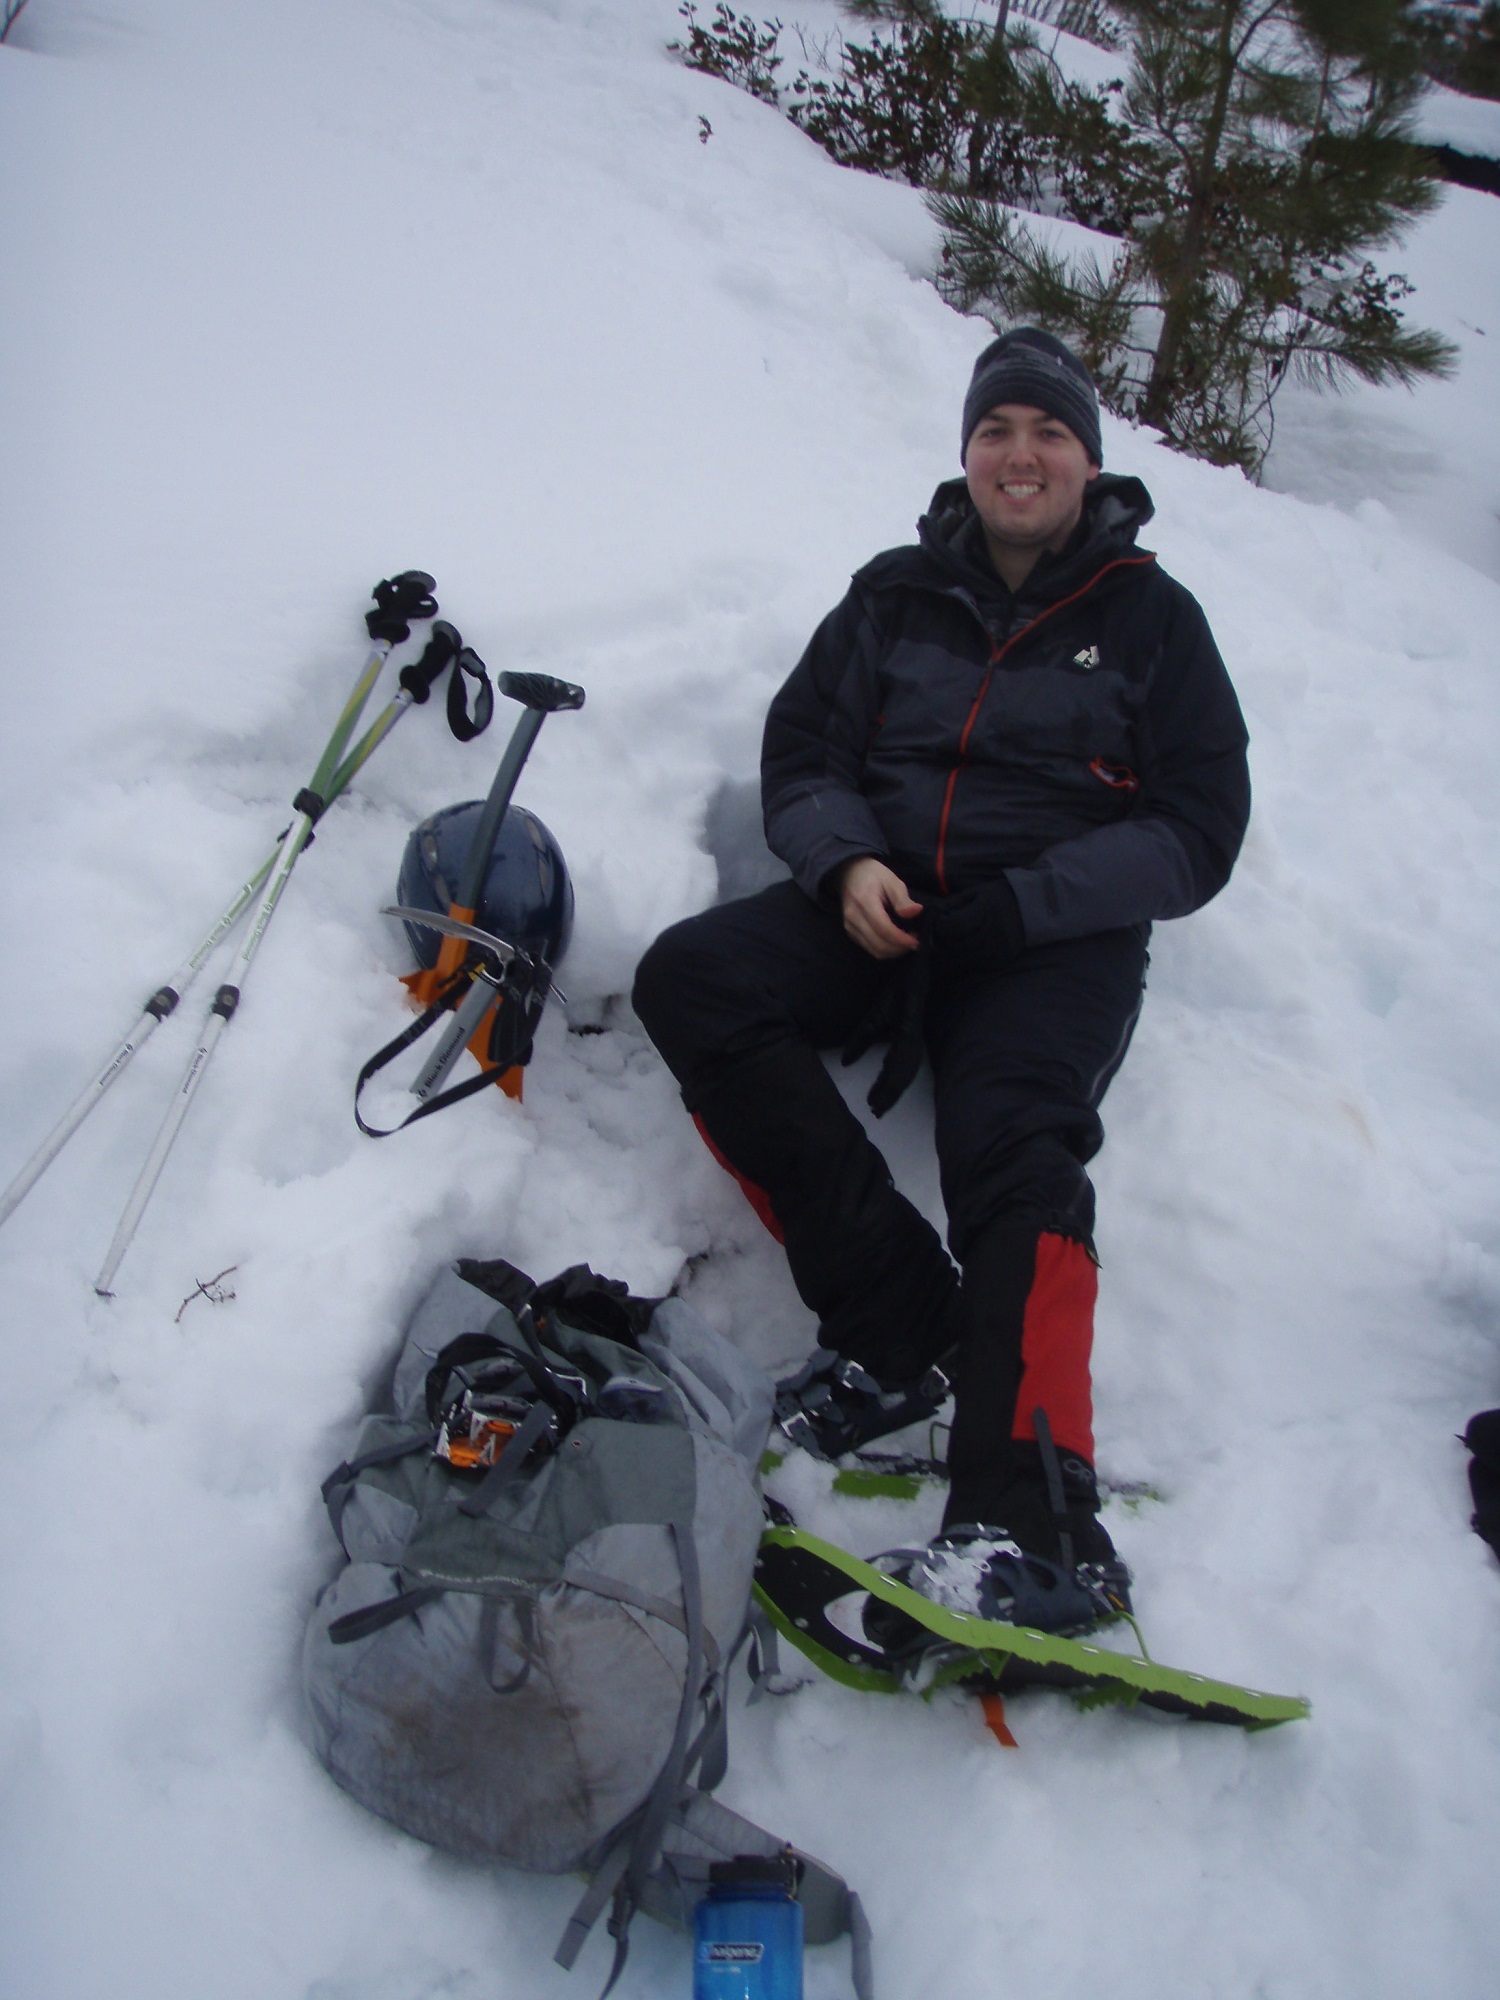 Winter Mountaineering Trip to the Enchantments in Washington State